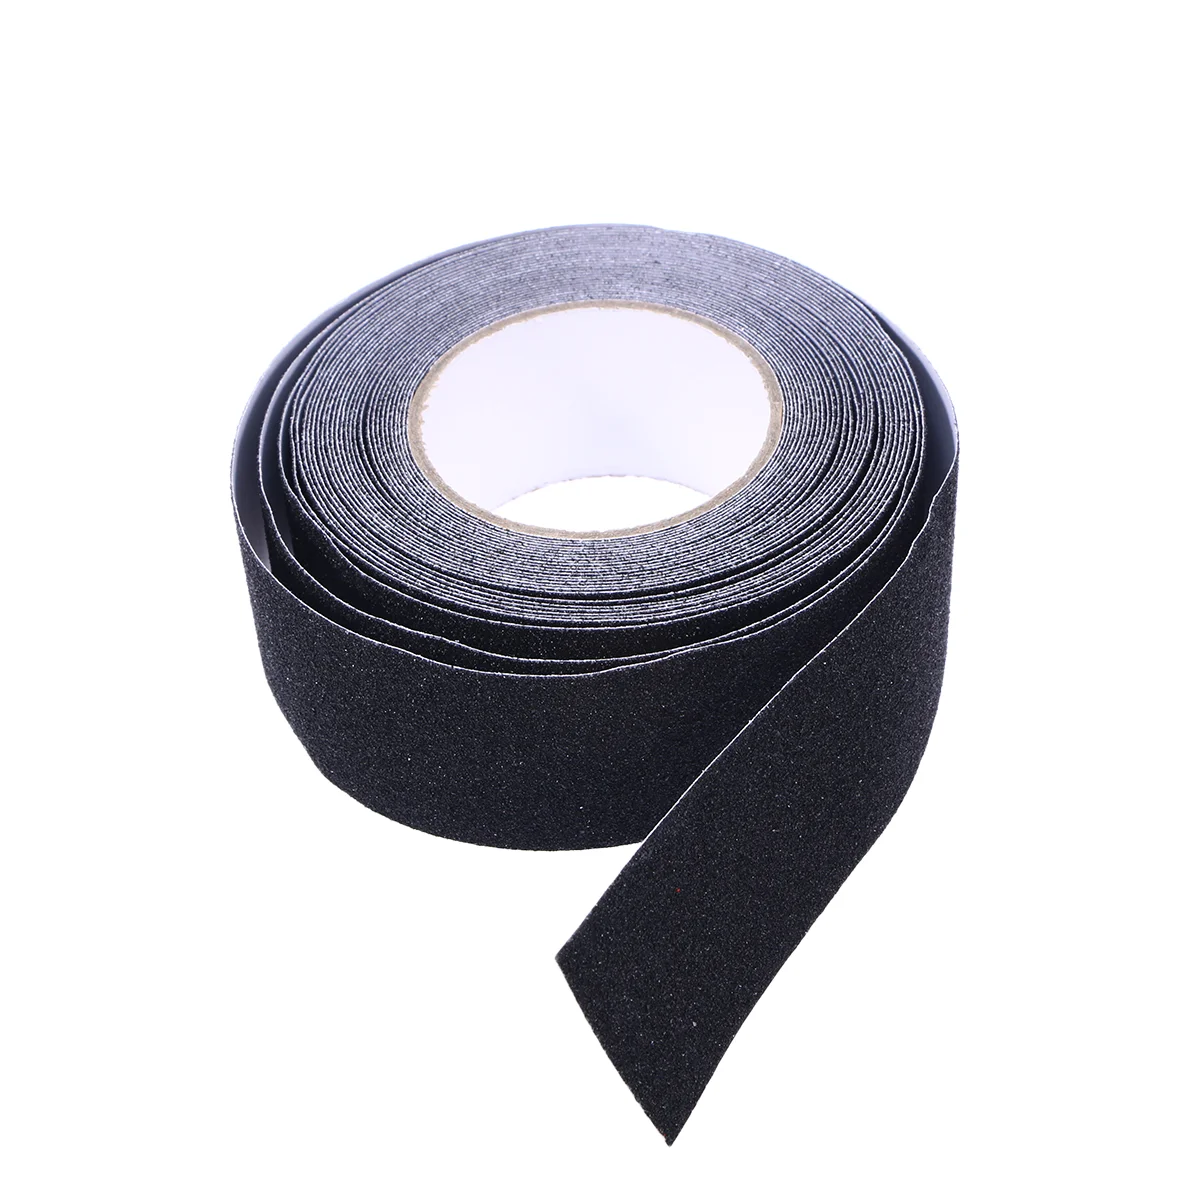 

1 pc 10M PVC Tape Multipurpose Professional High Grip Black Adhesive Backed Tape for Cables Computer